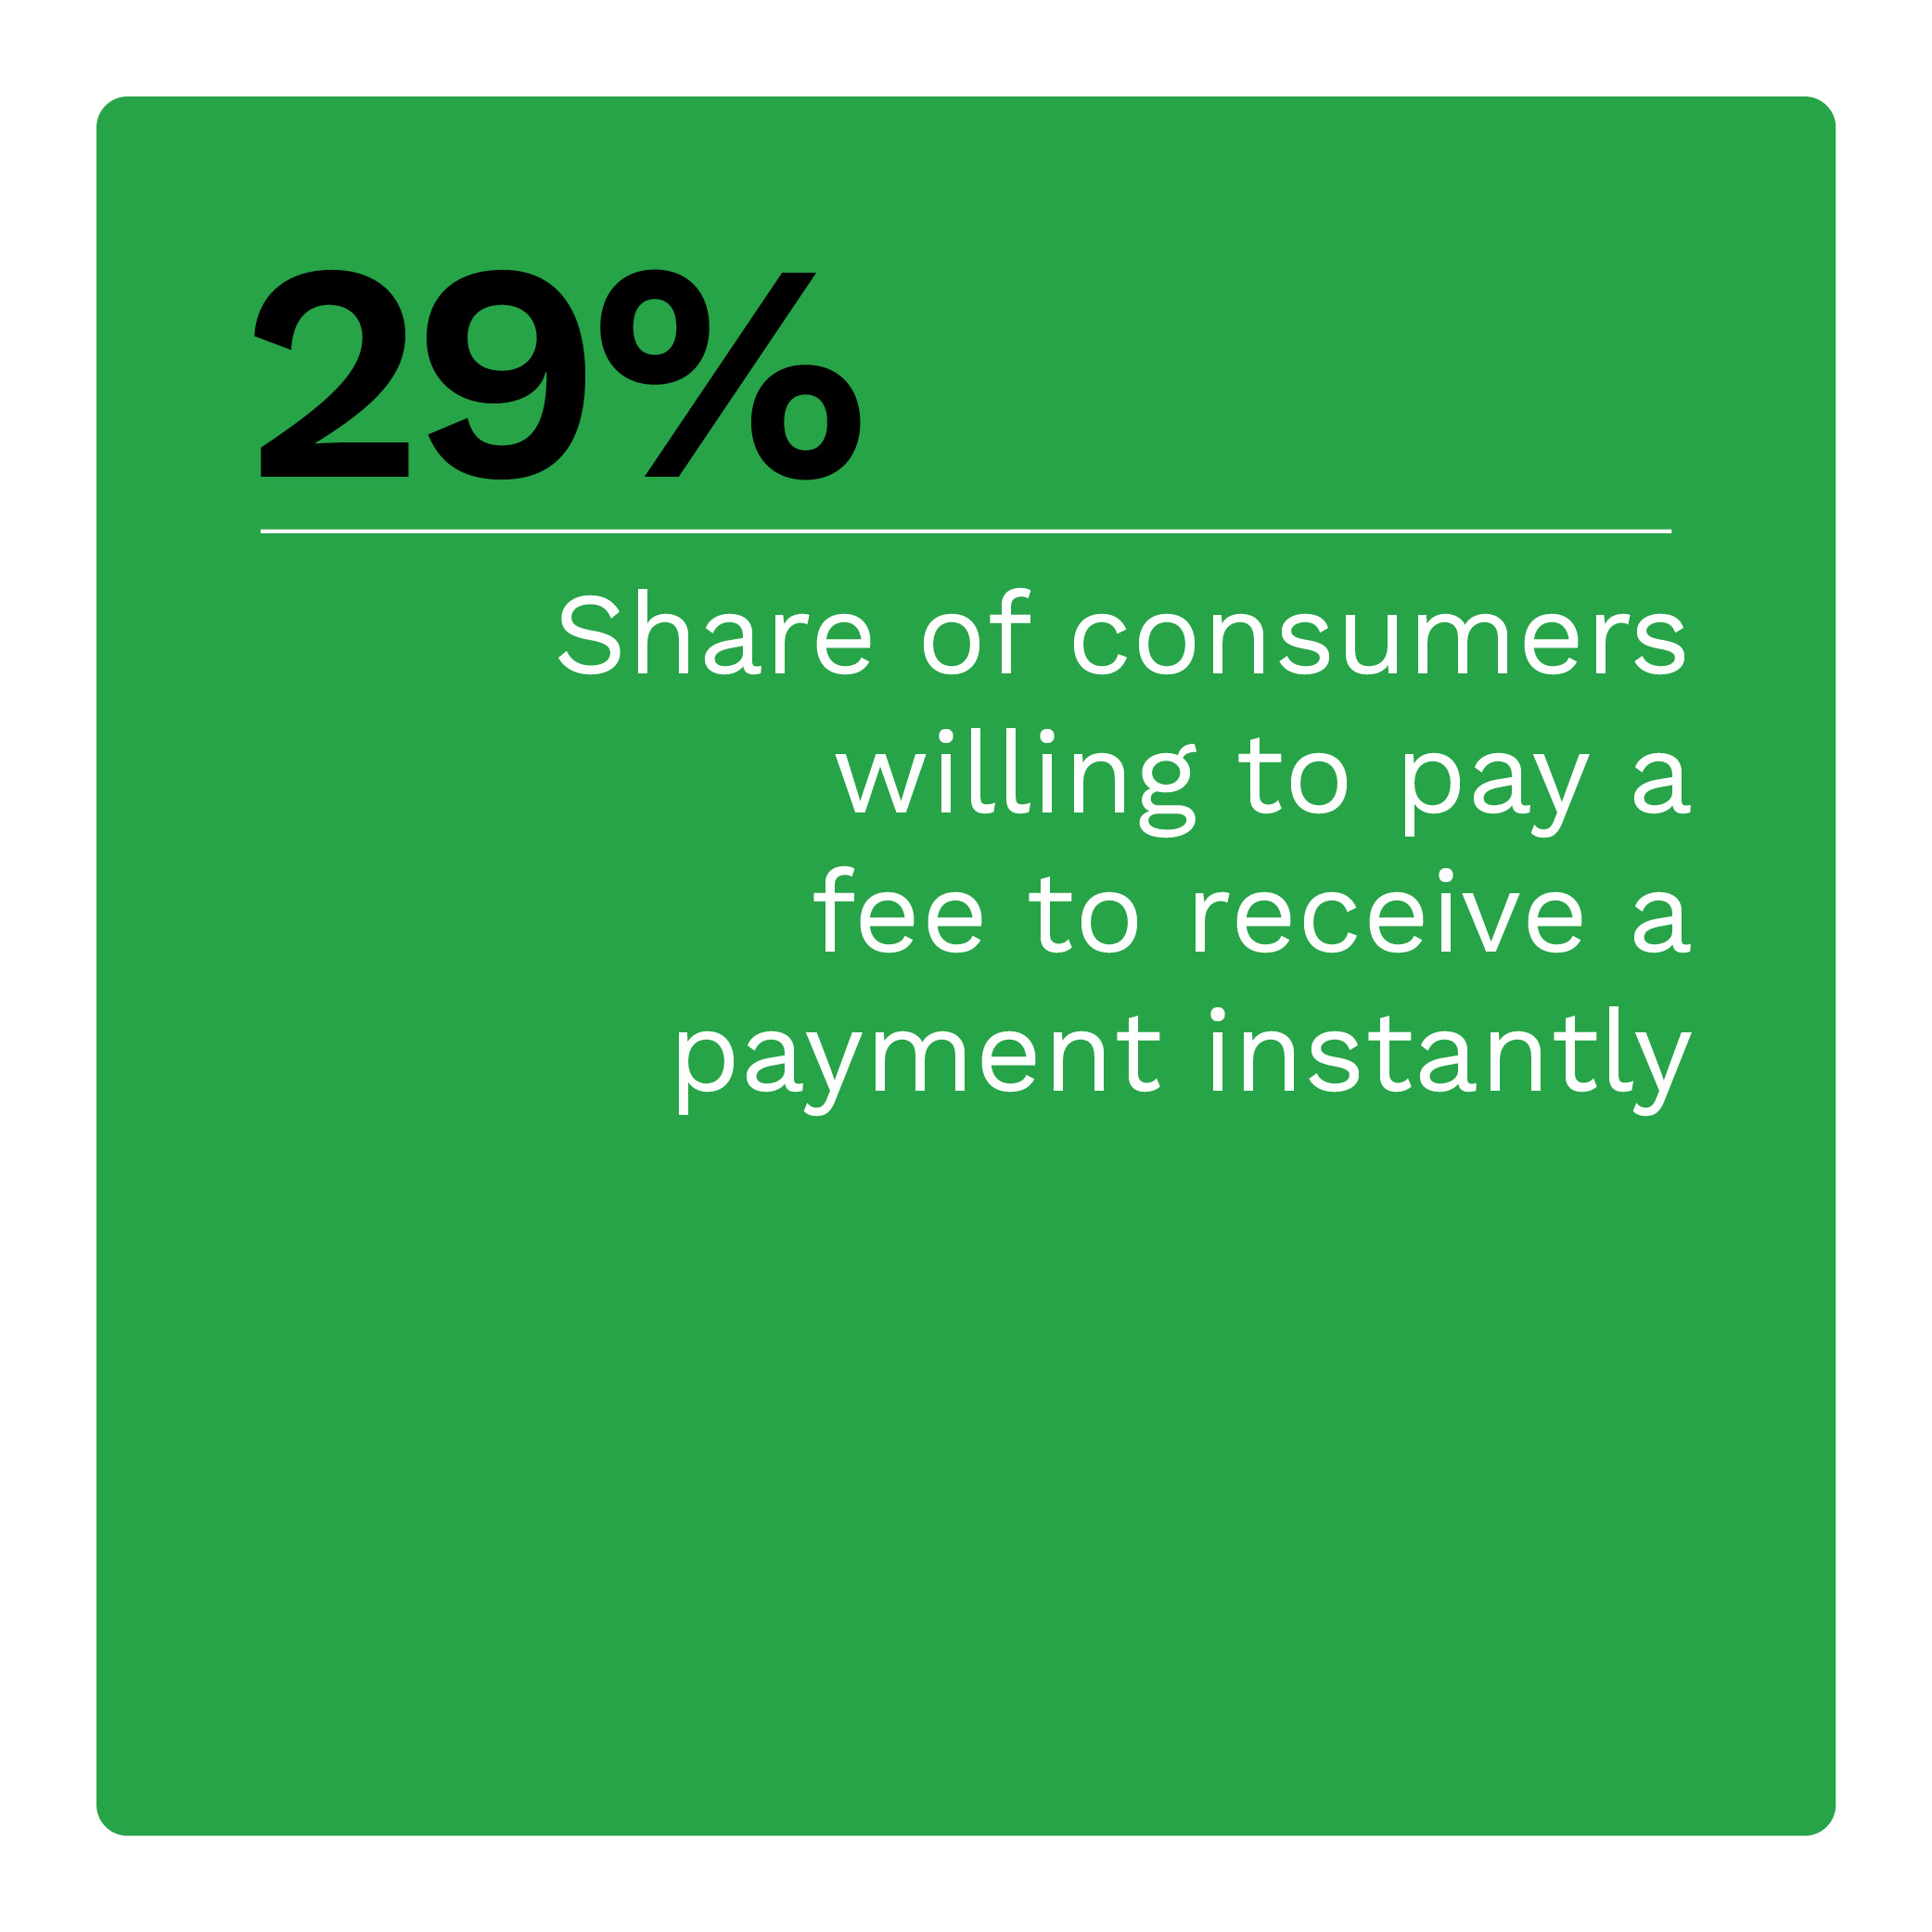 29%: Share of consumers willing to pay a fee to receive a payment instantly